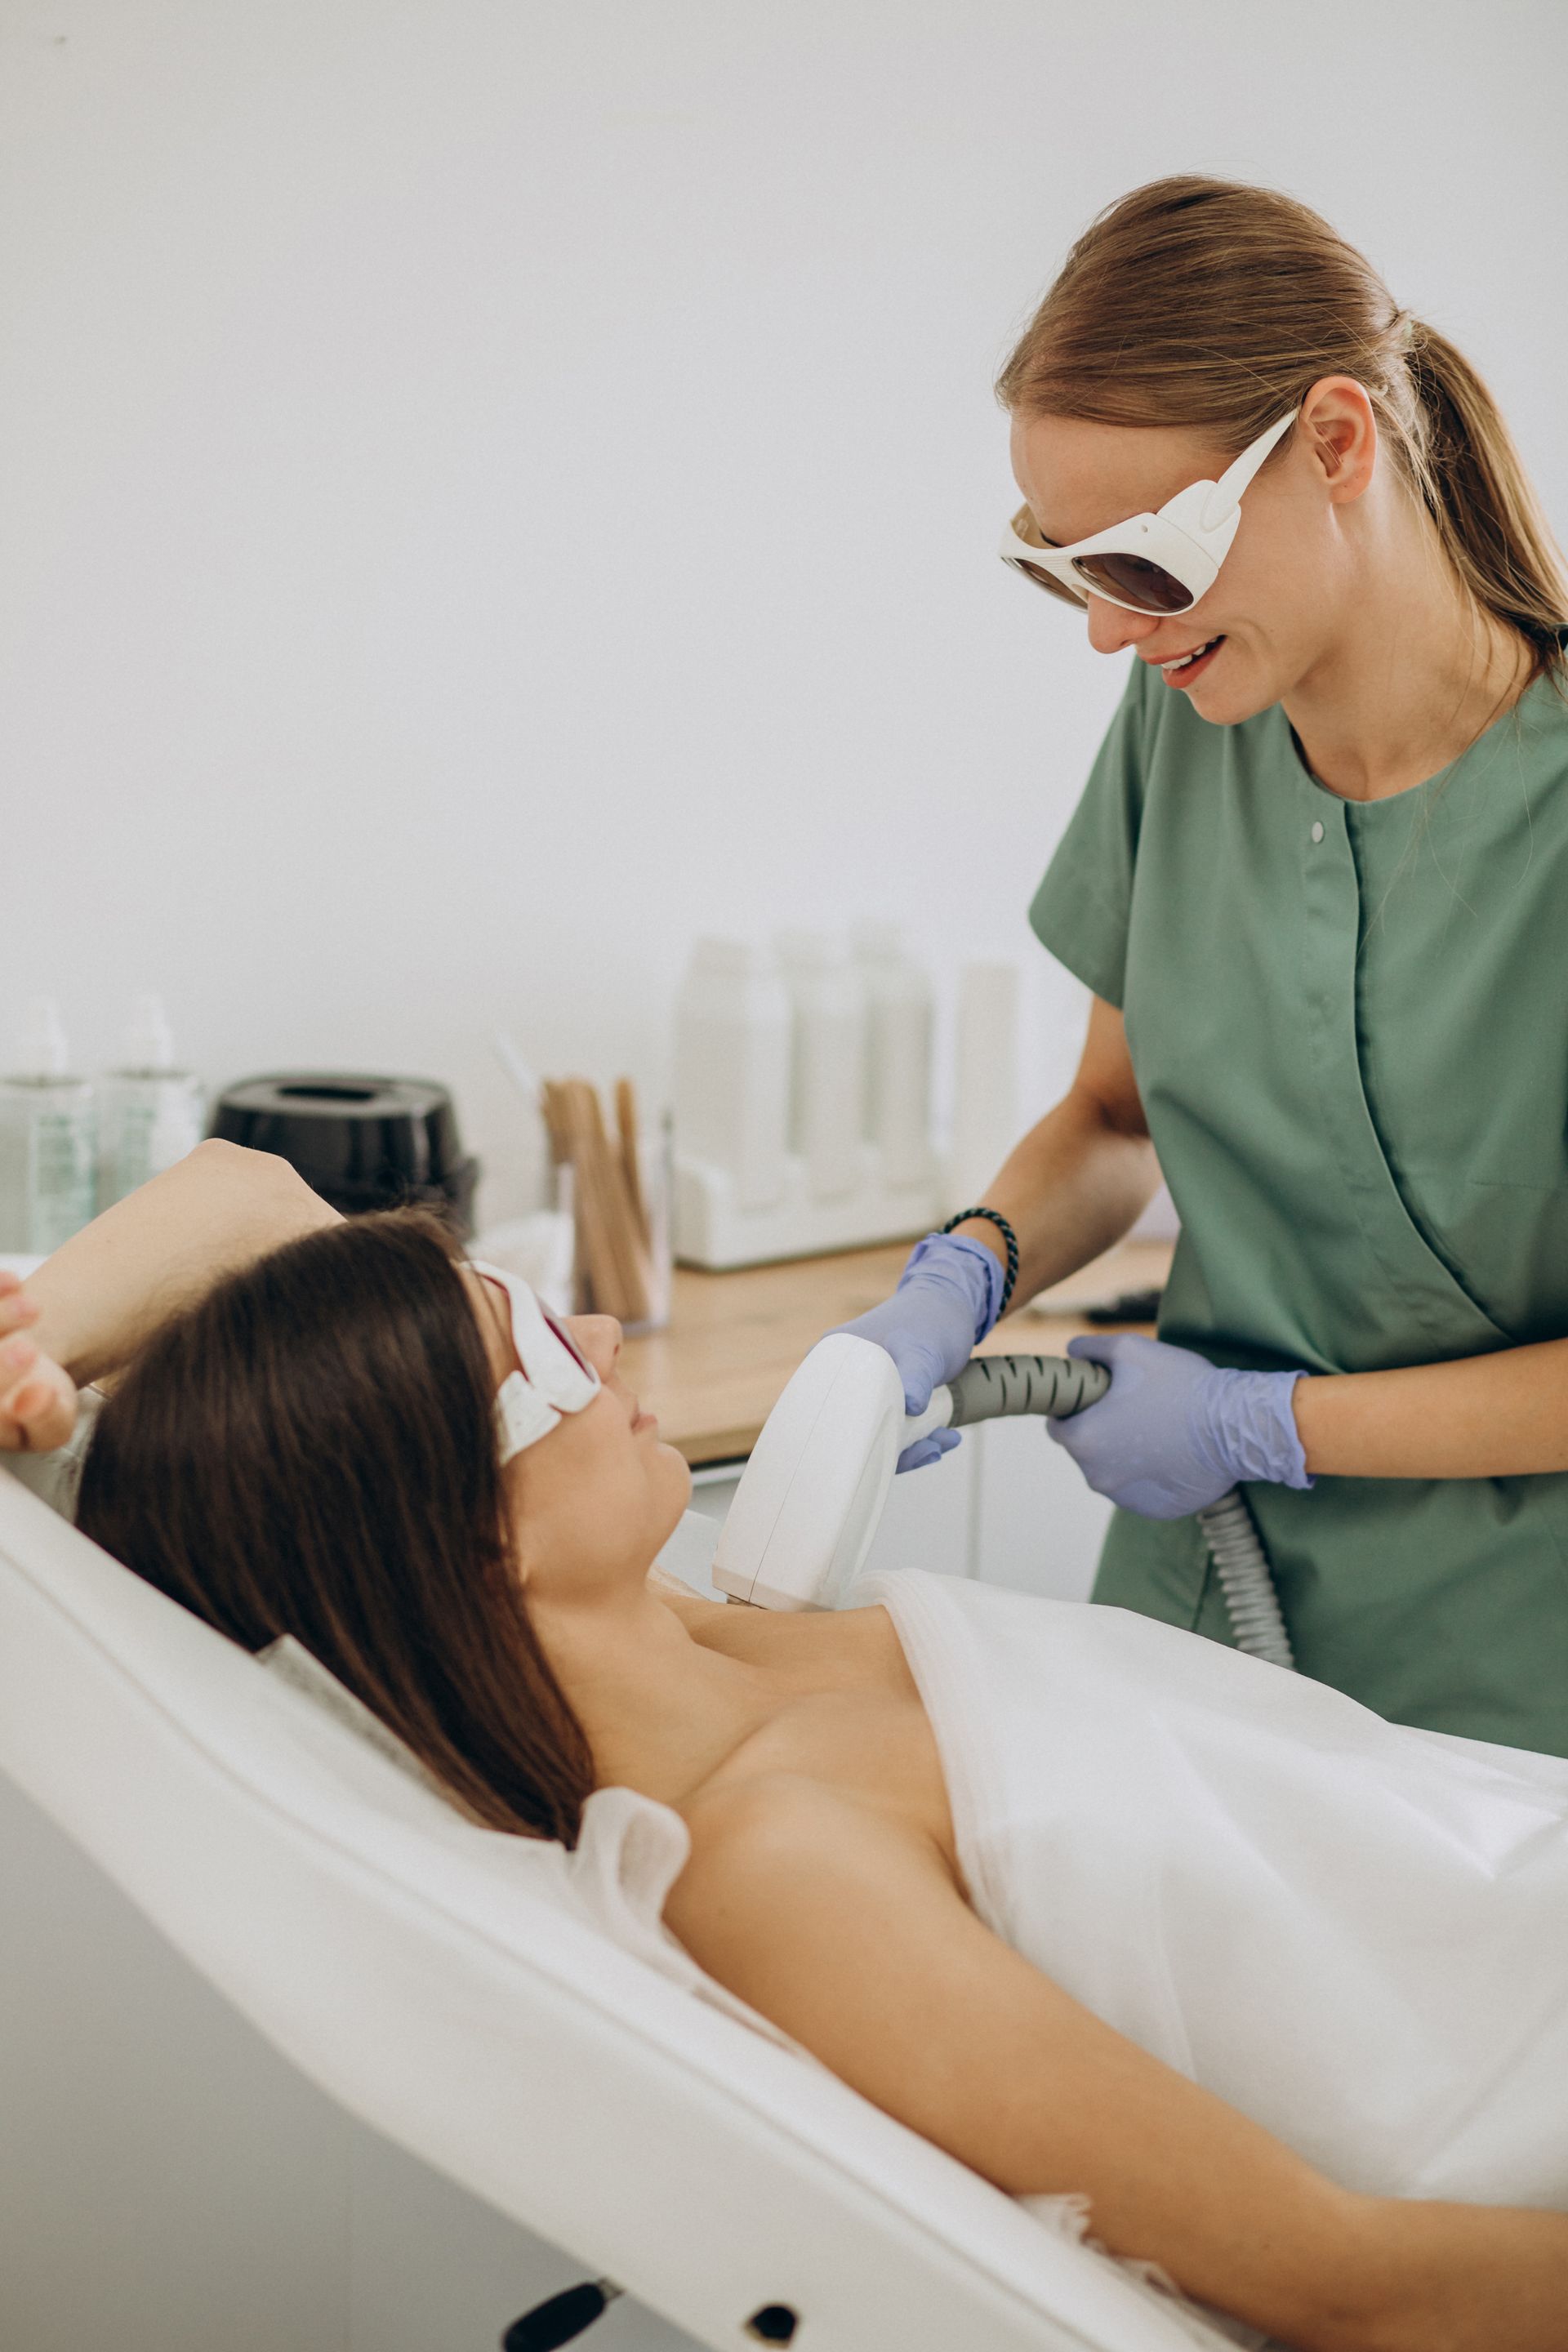 close-up-calm-woman-having-her-eyes-closed-while-being-beauty-salon-having-procedure-laser-hair-removal-her-face